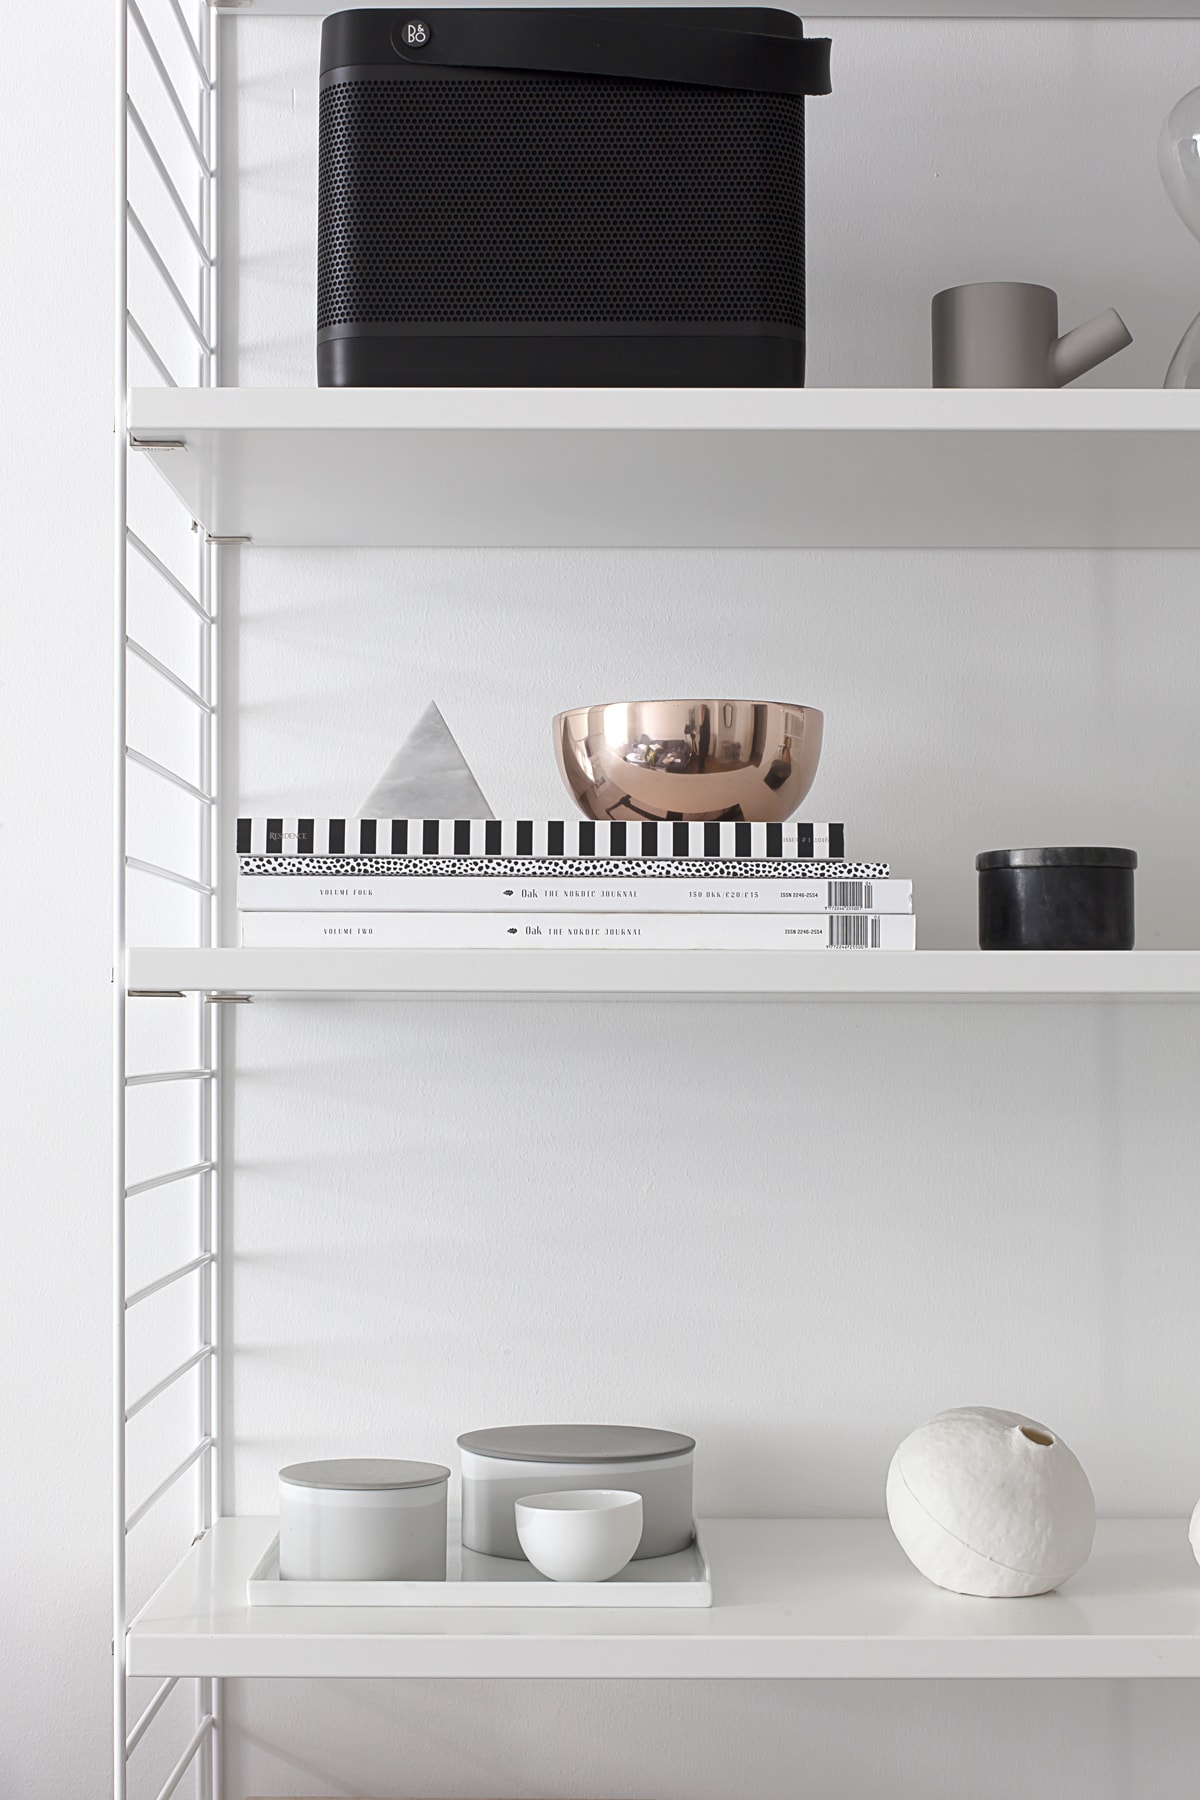 Louise Roe Objects - via Coco Lapine Design